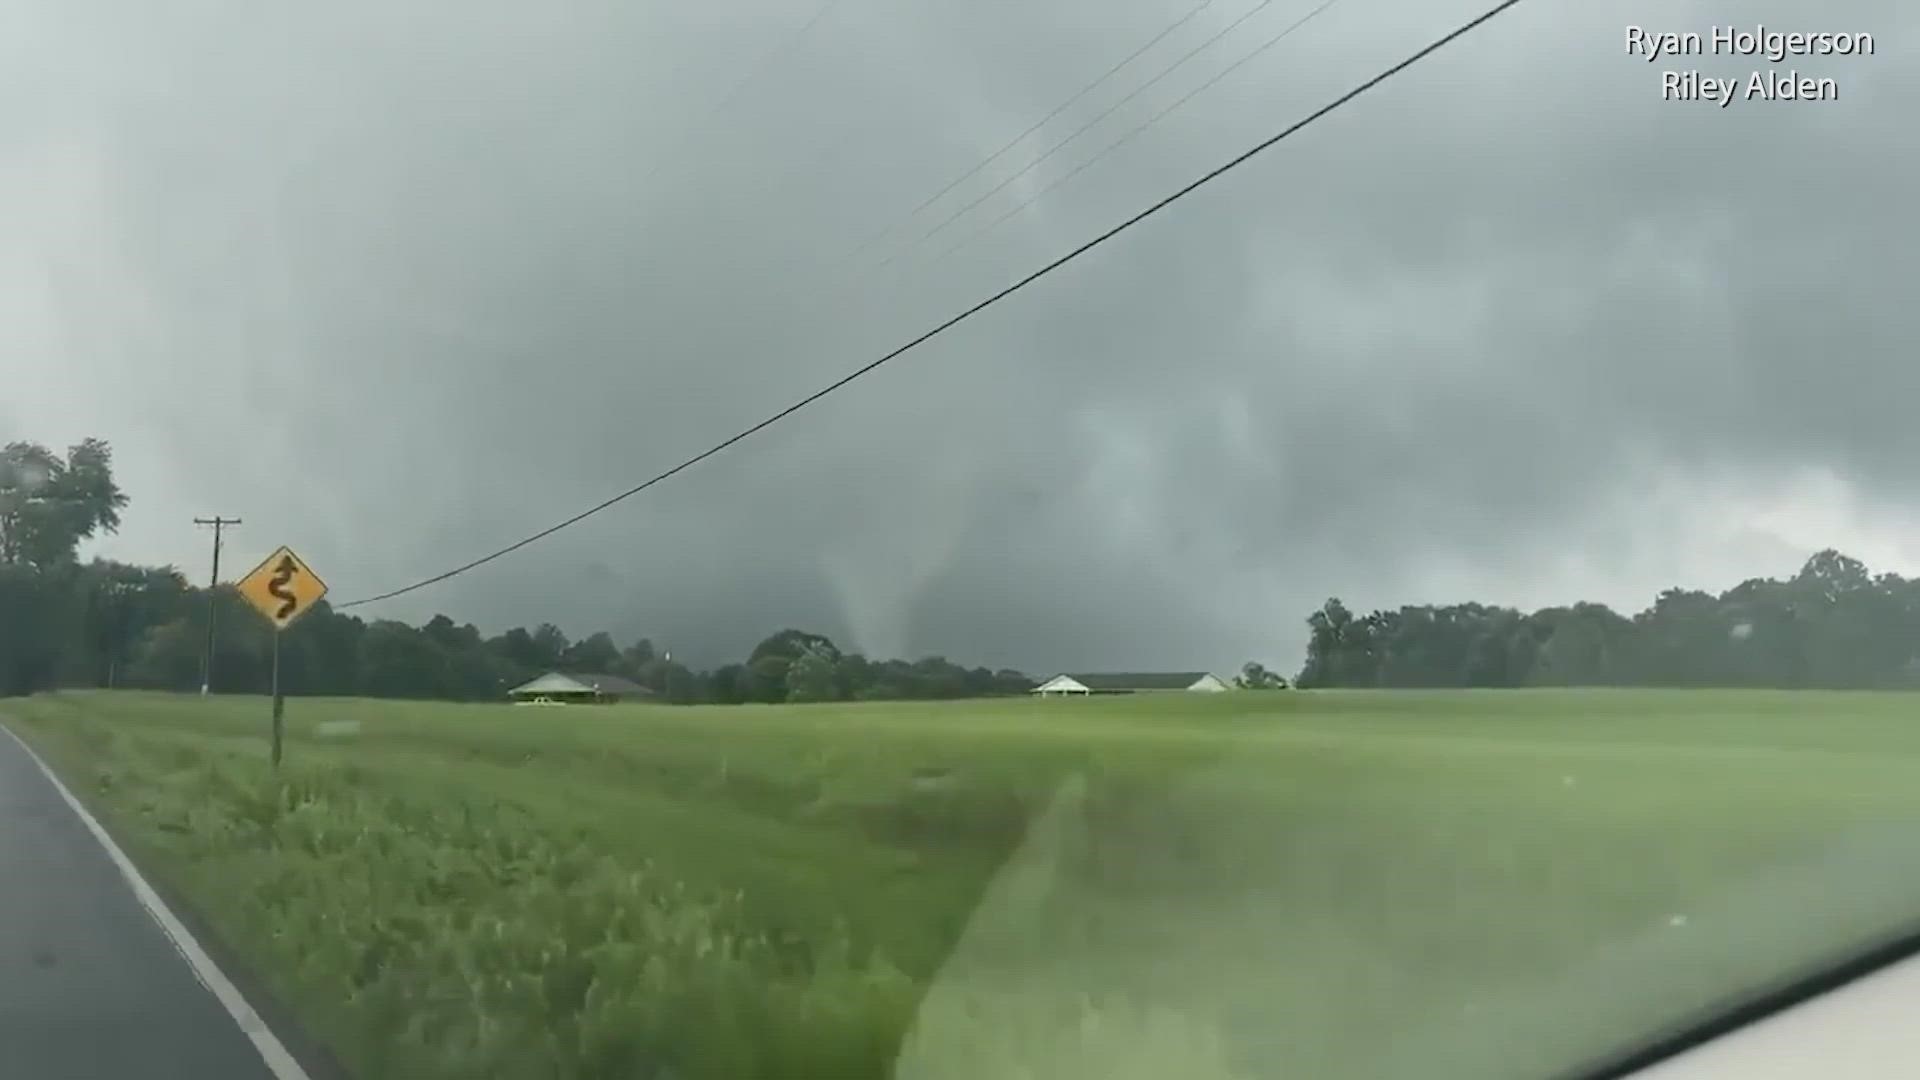 Ryan Holgerson and Riley Alden captured this video of a tornado in Ronda, NC in Wilkes County.